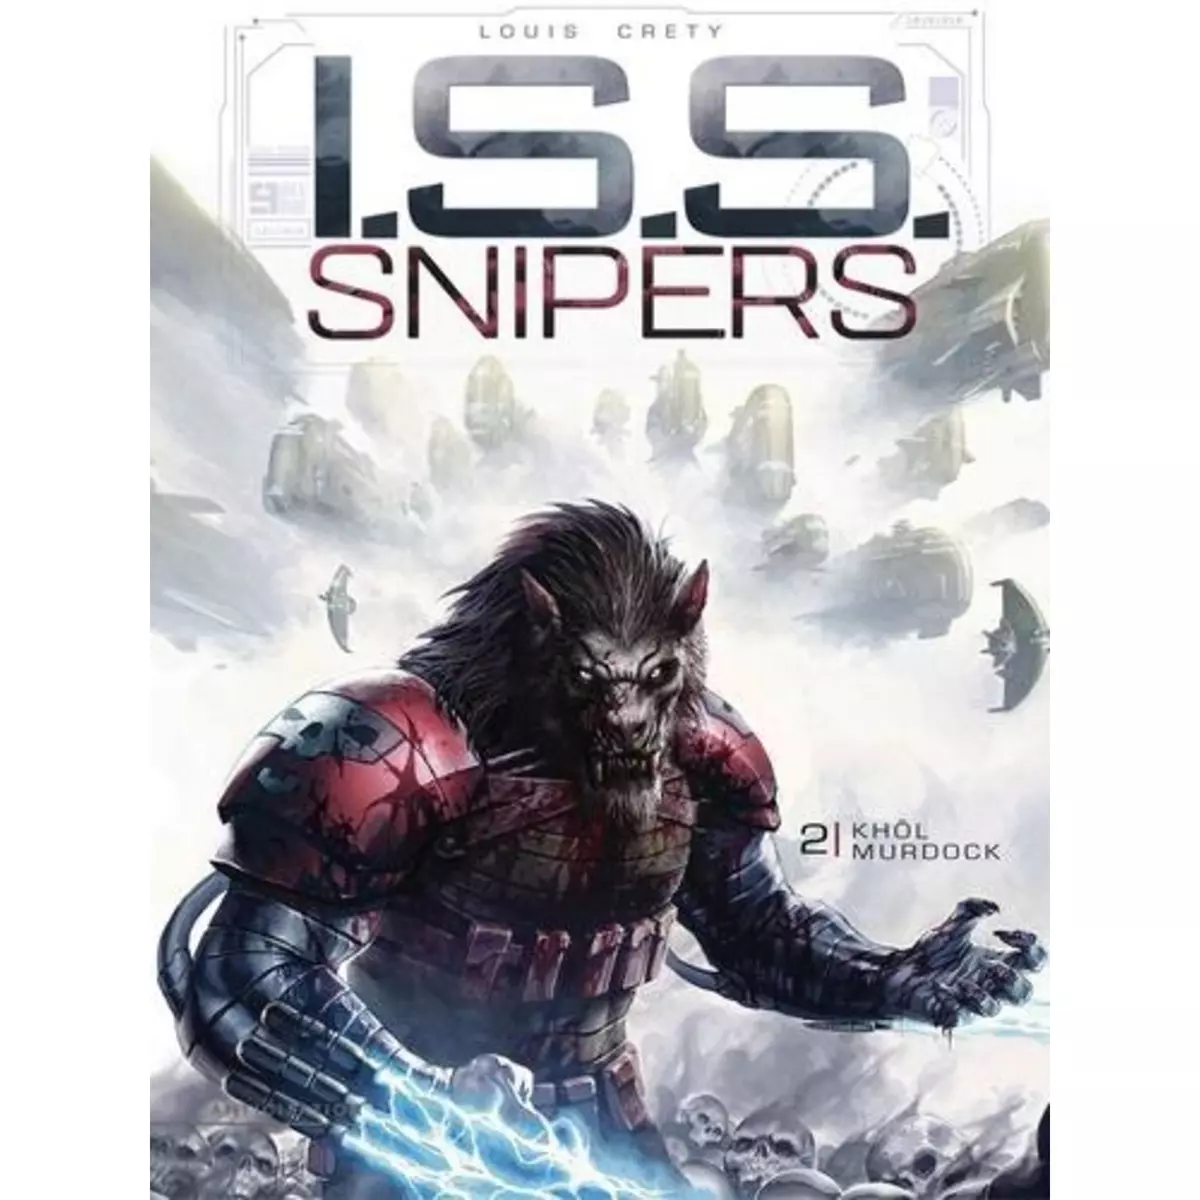  I.S.S. SNIPERS TOME 2 : KHOL MURDOCK, Créty Stéphane